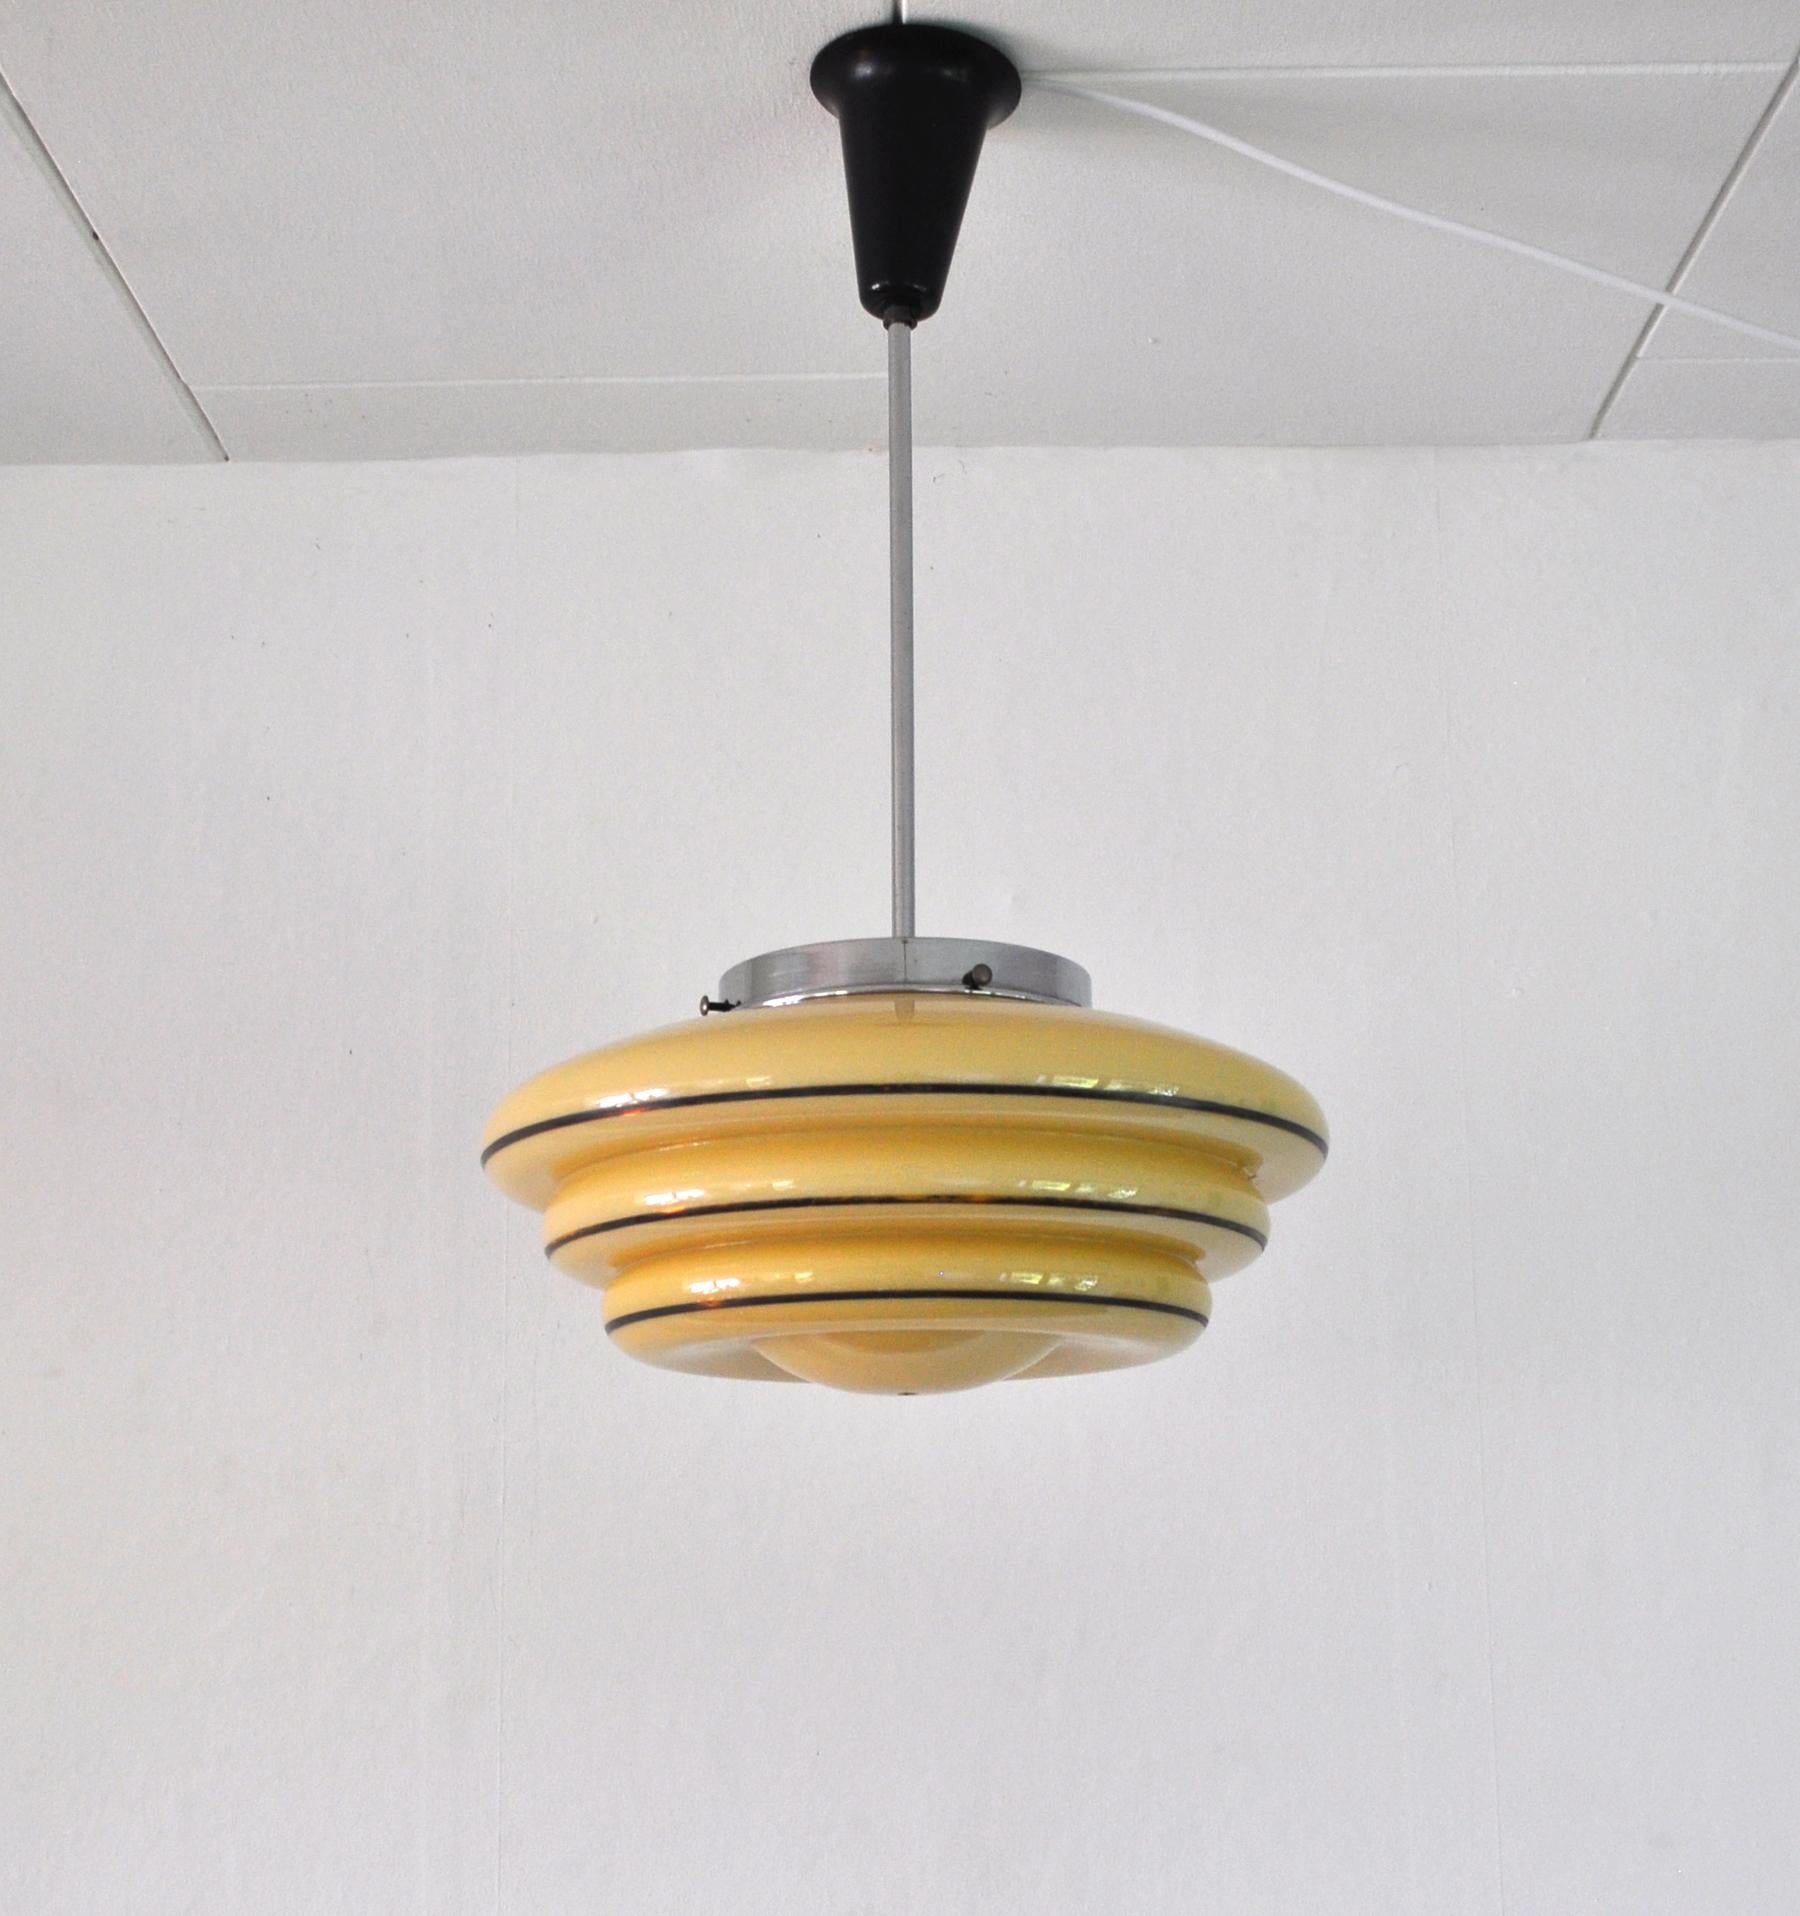 Danish Art Deco pendant lamp composed of fluted opaline glass with painted overlay stripes. Chrome Stem and original Bakelit canopy. Attributed to Lyfa in the 1930s.

Excellent condition.
Light source: E27 Edison screw fitting.
Dimensions: Full